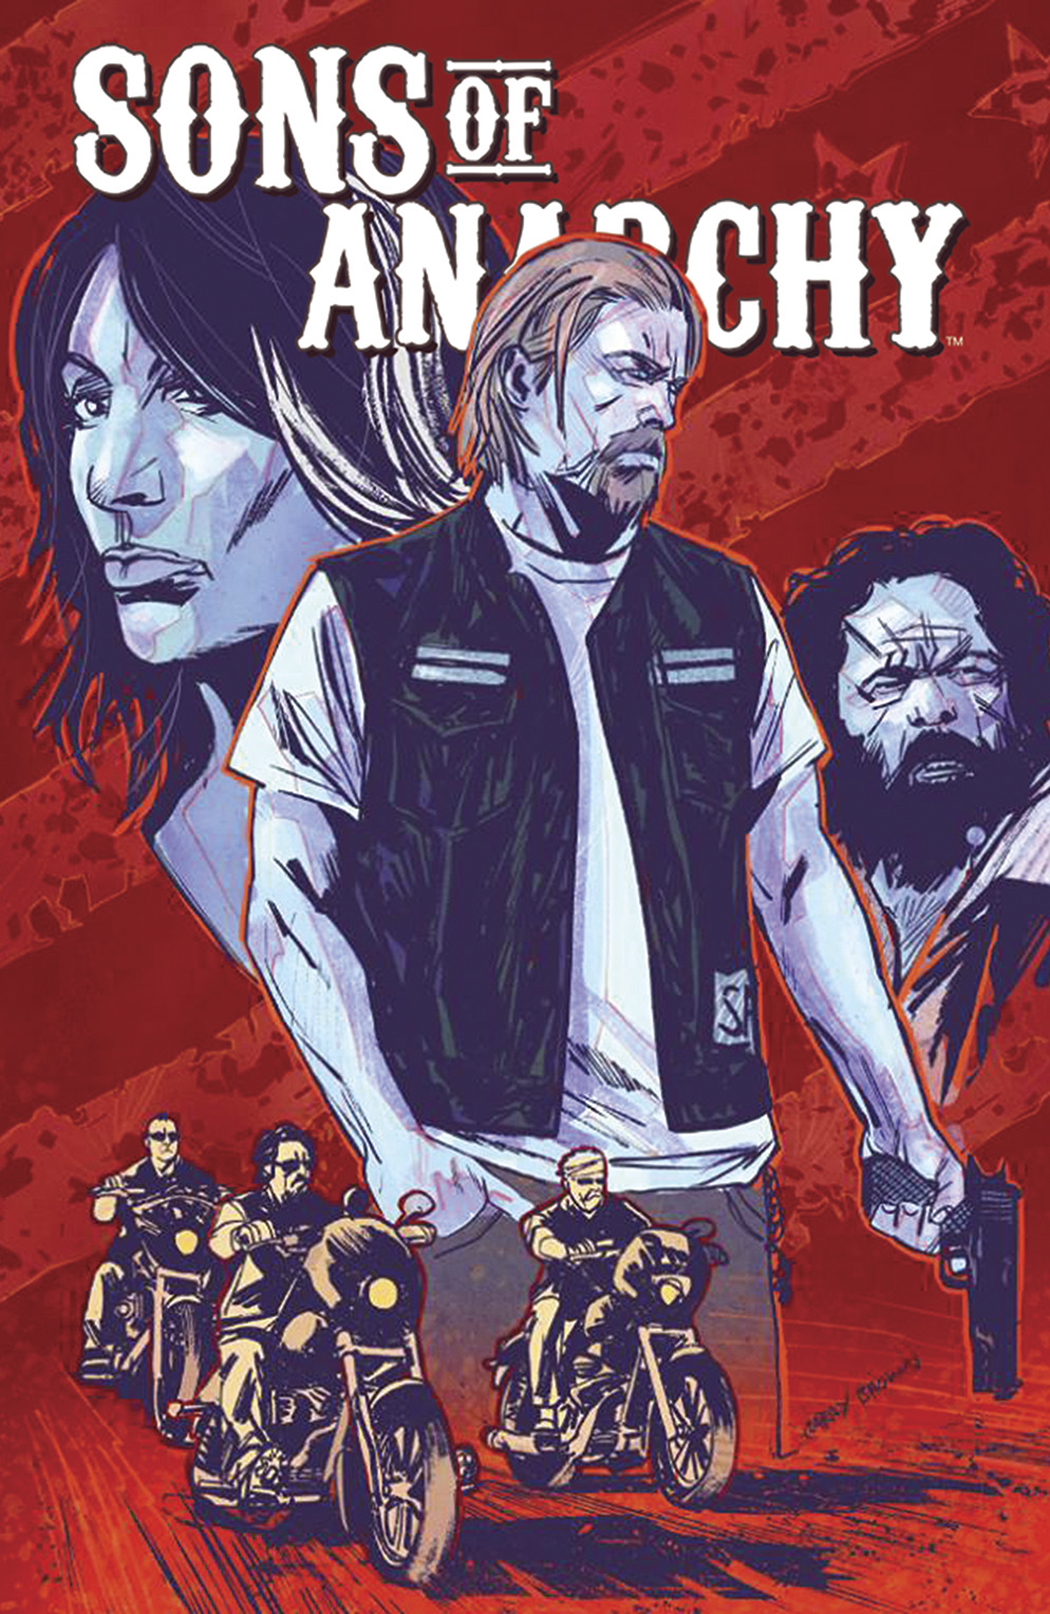 SONS OF ANARCHY #11 (MR)